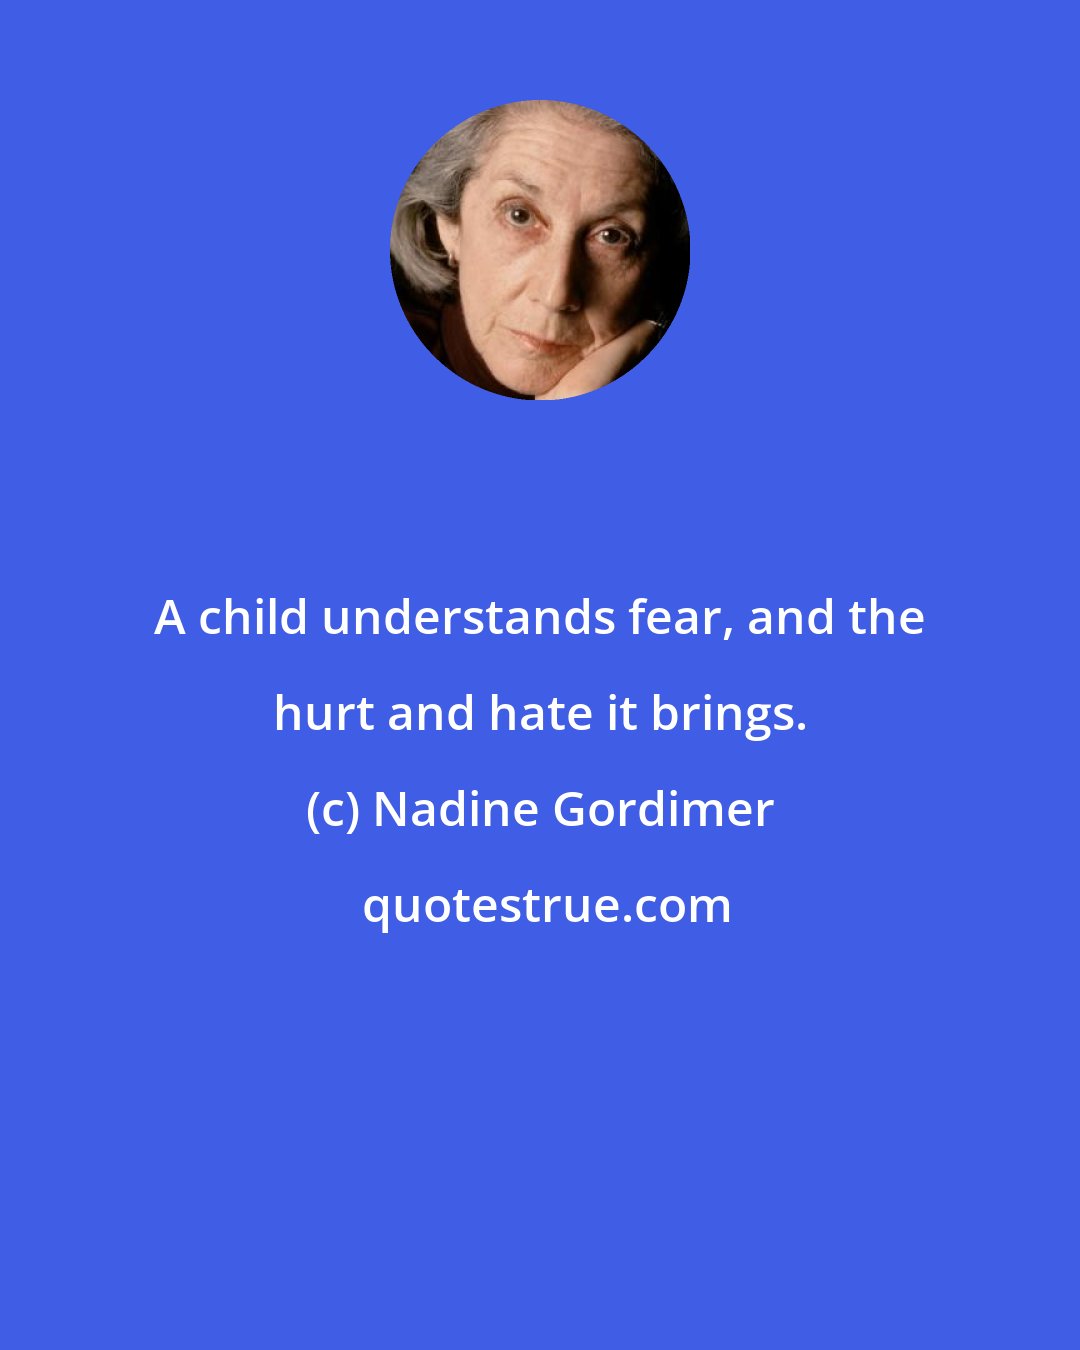 Nadine Gordimer: A child understands fear, and the hurt and hate it brings.